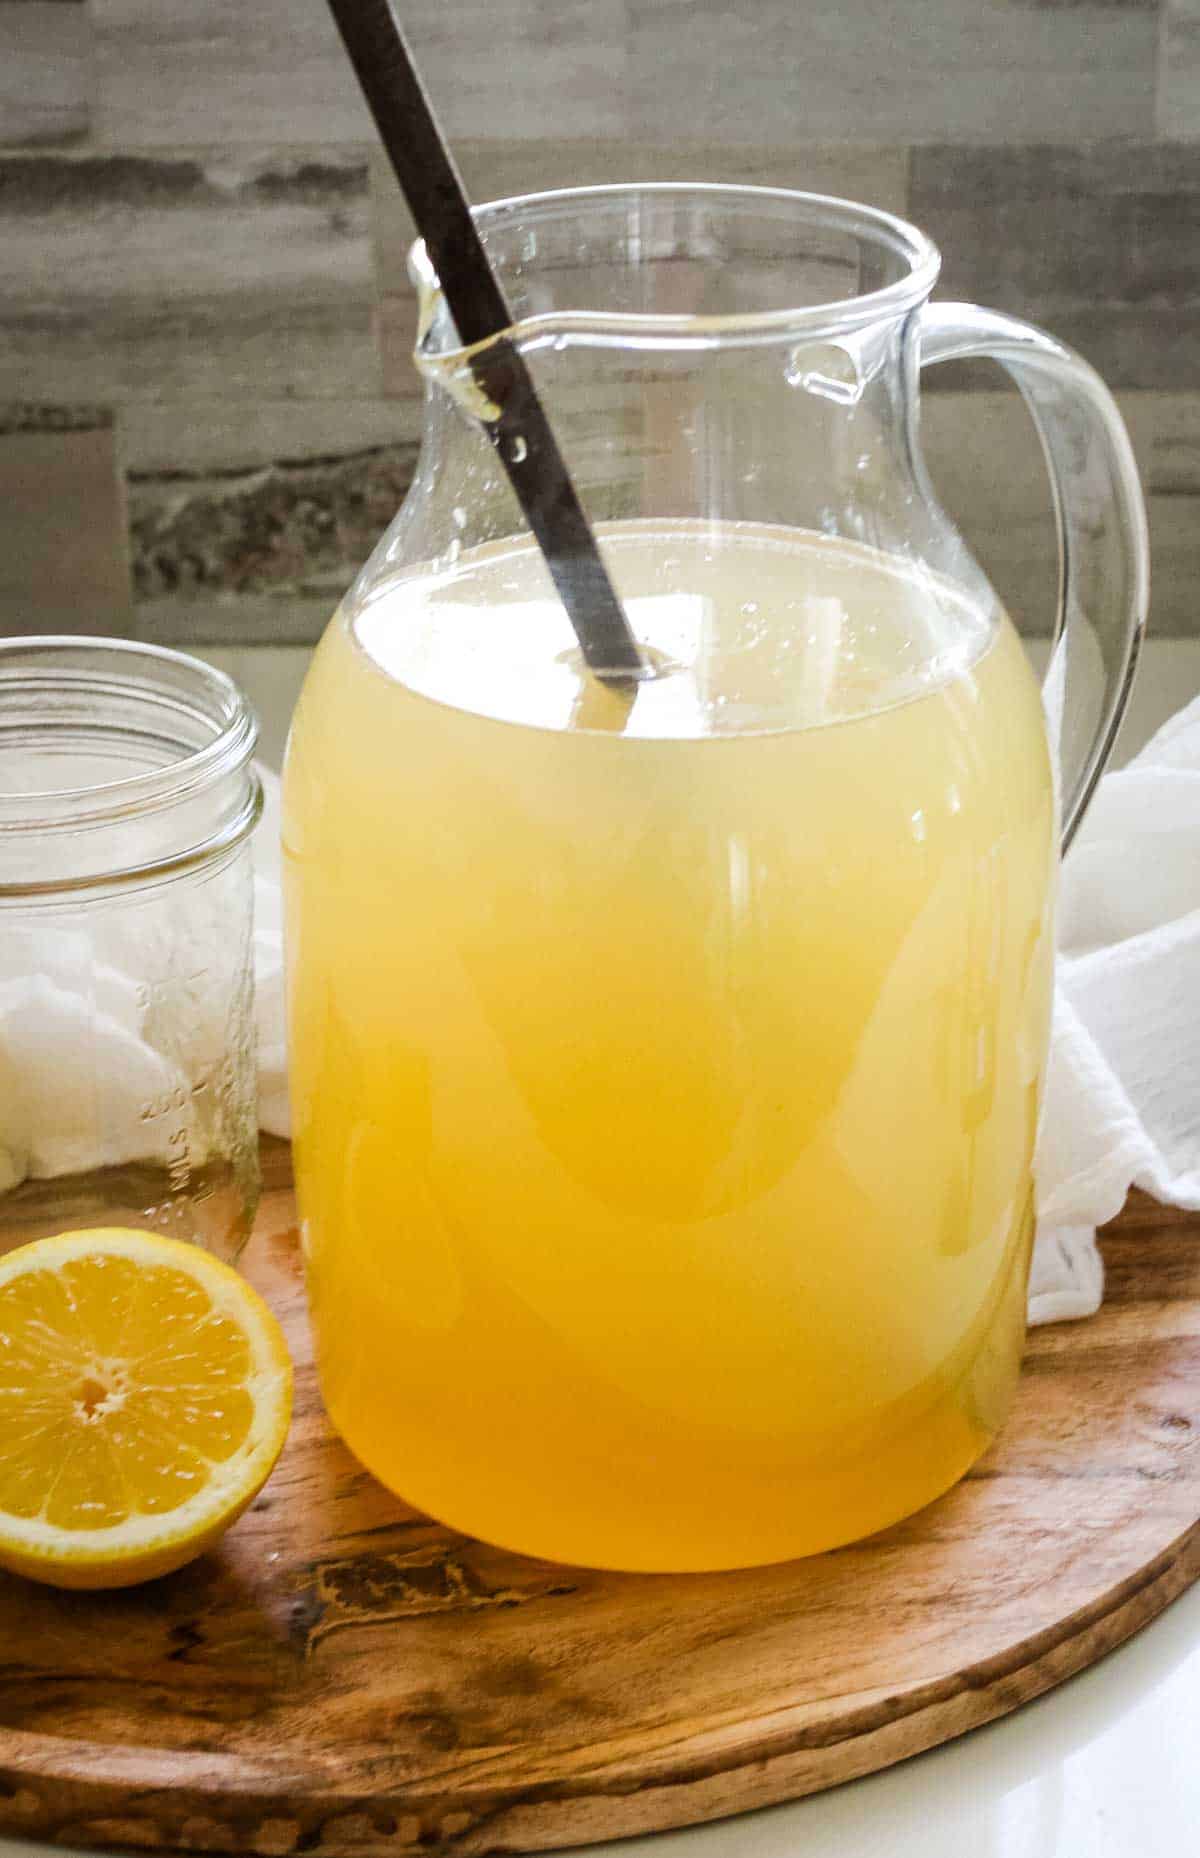 pitcher of lemonade with a long spoon sticking out and a cut lemon half to the side.